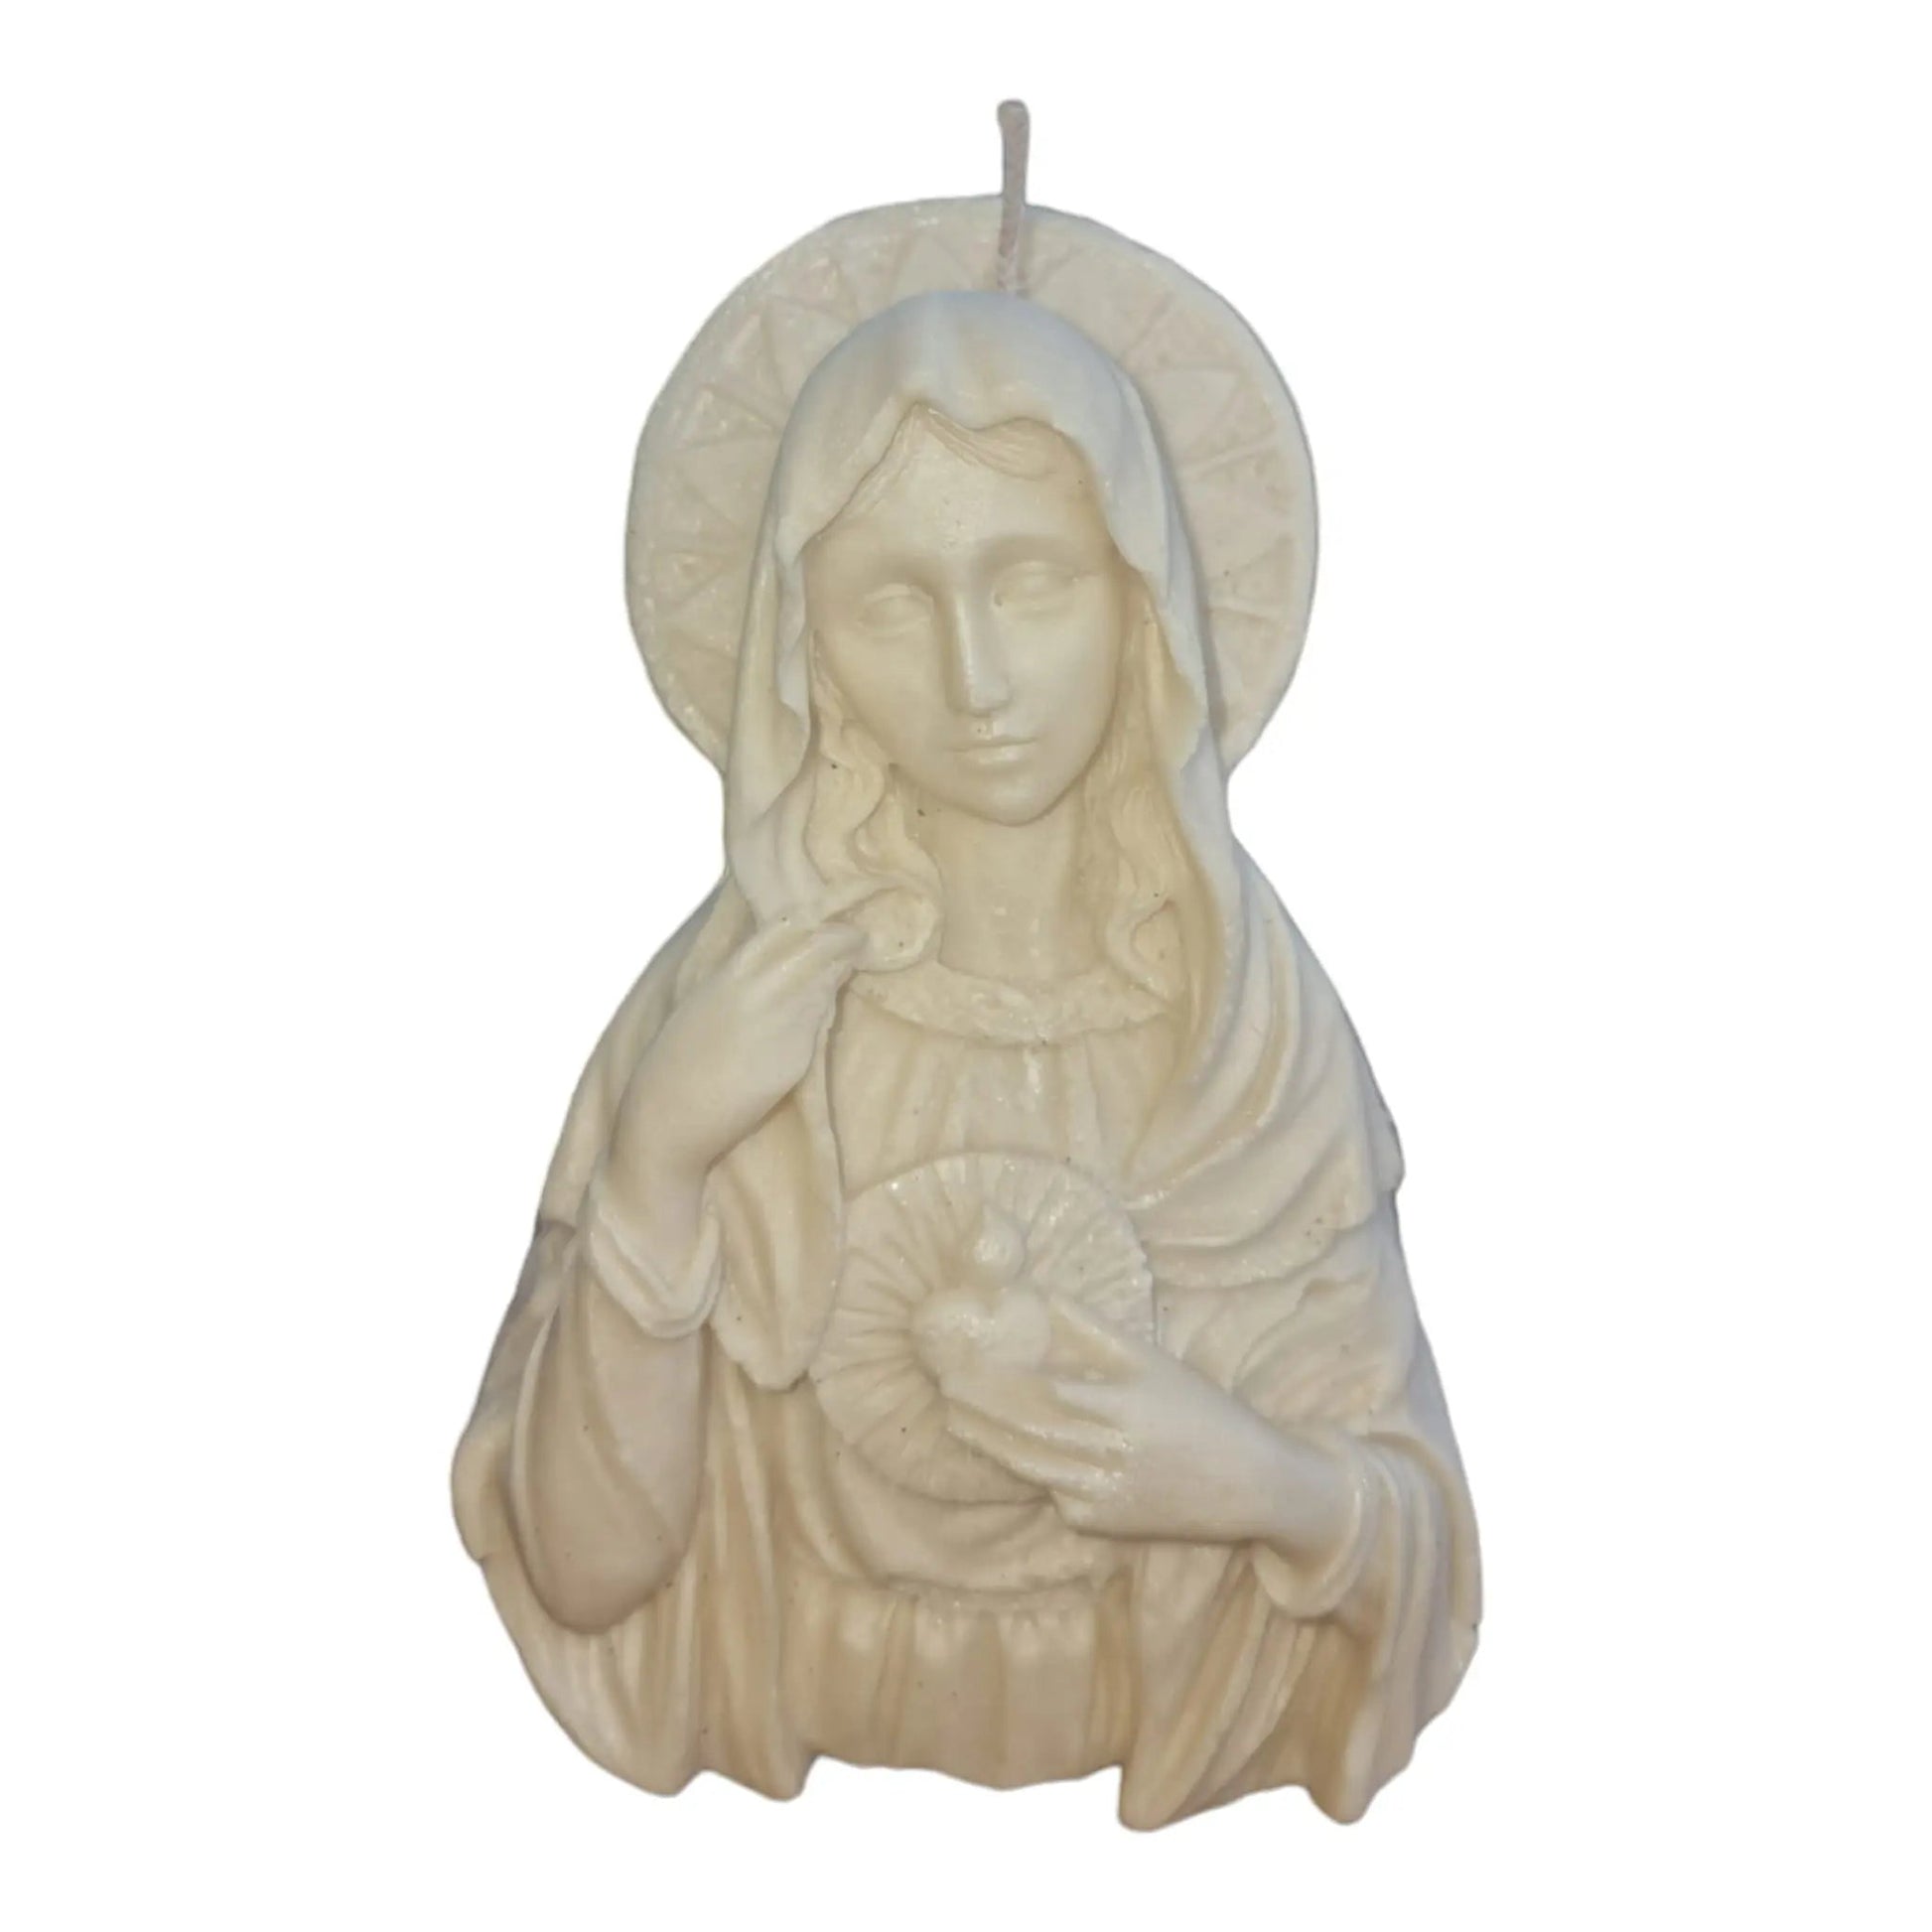 Mother of Jesus - Divine Essence Rosemary & Vanilla Scented Candle - Auras Workshop  -  Candle Figurines -   - Cyprus & Greece - Wholesale - Retail #